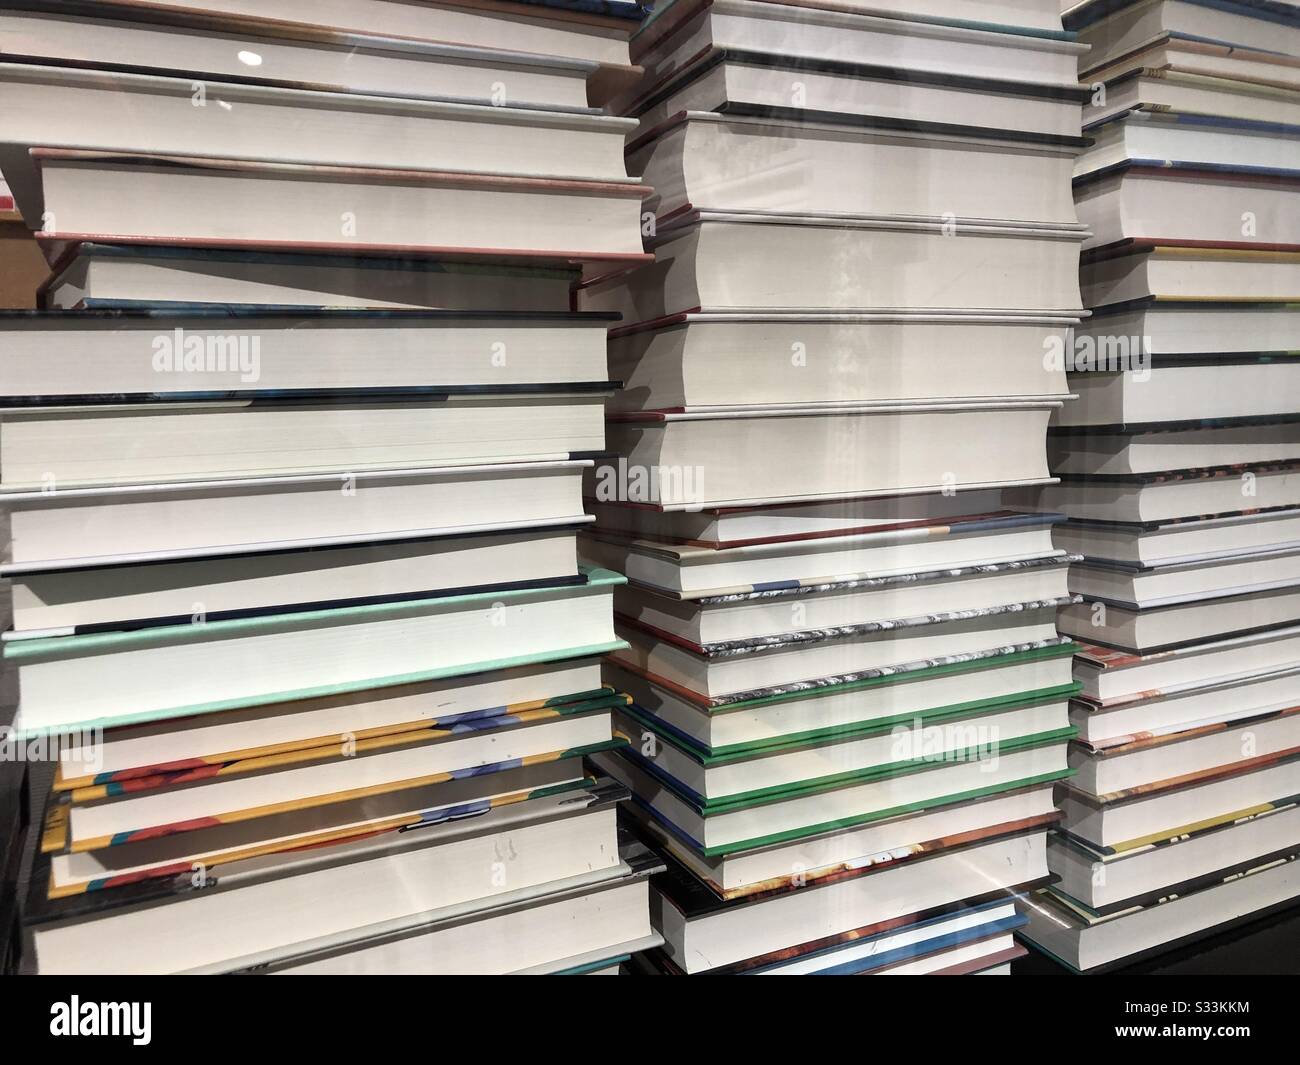 Stacked Piles of Hardcover Books Stock Photo